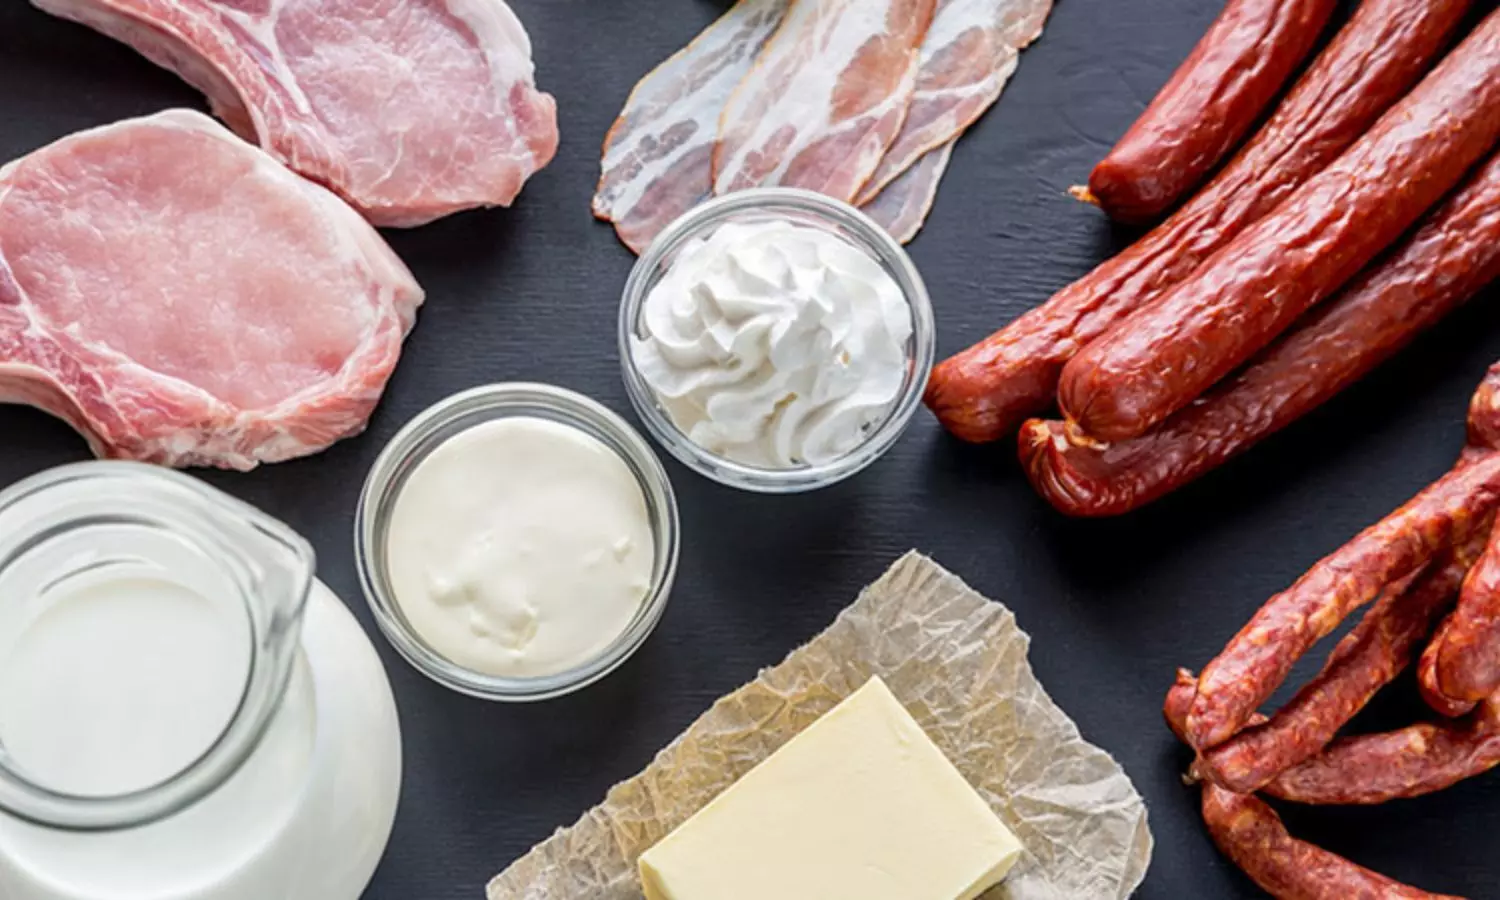 Saturated fats villain no more for development of CVD, says review